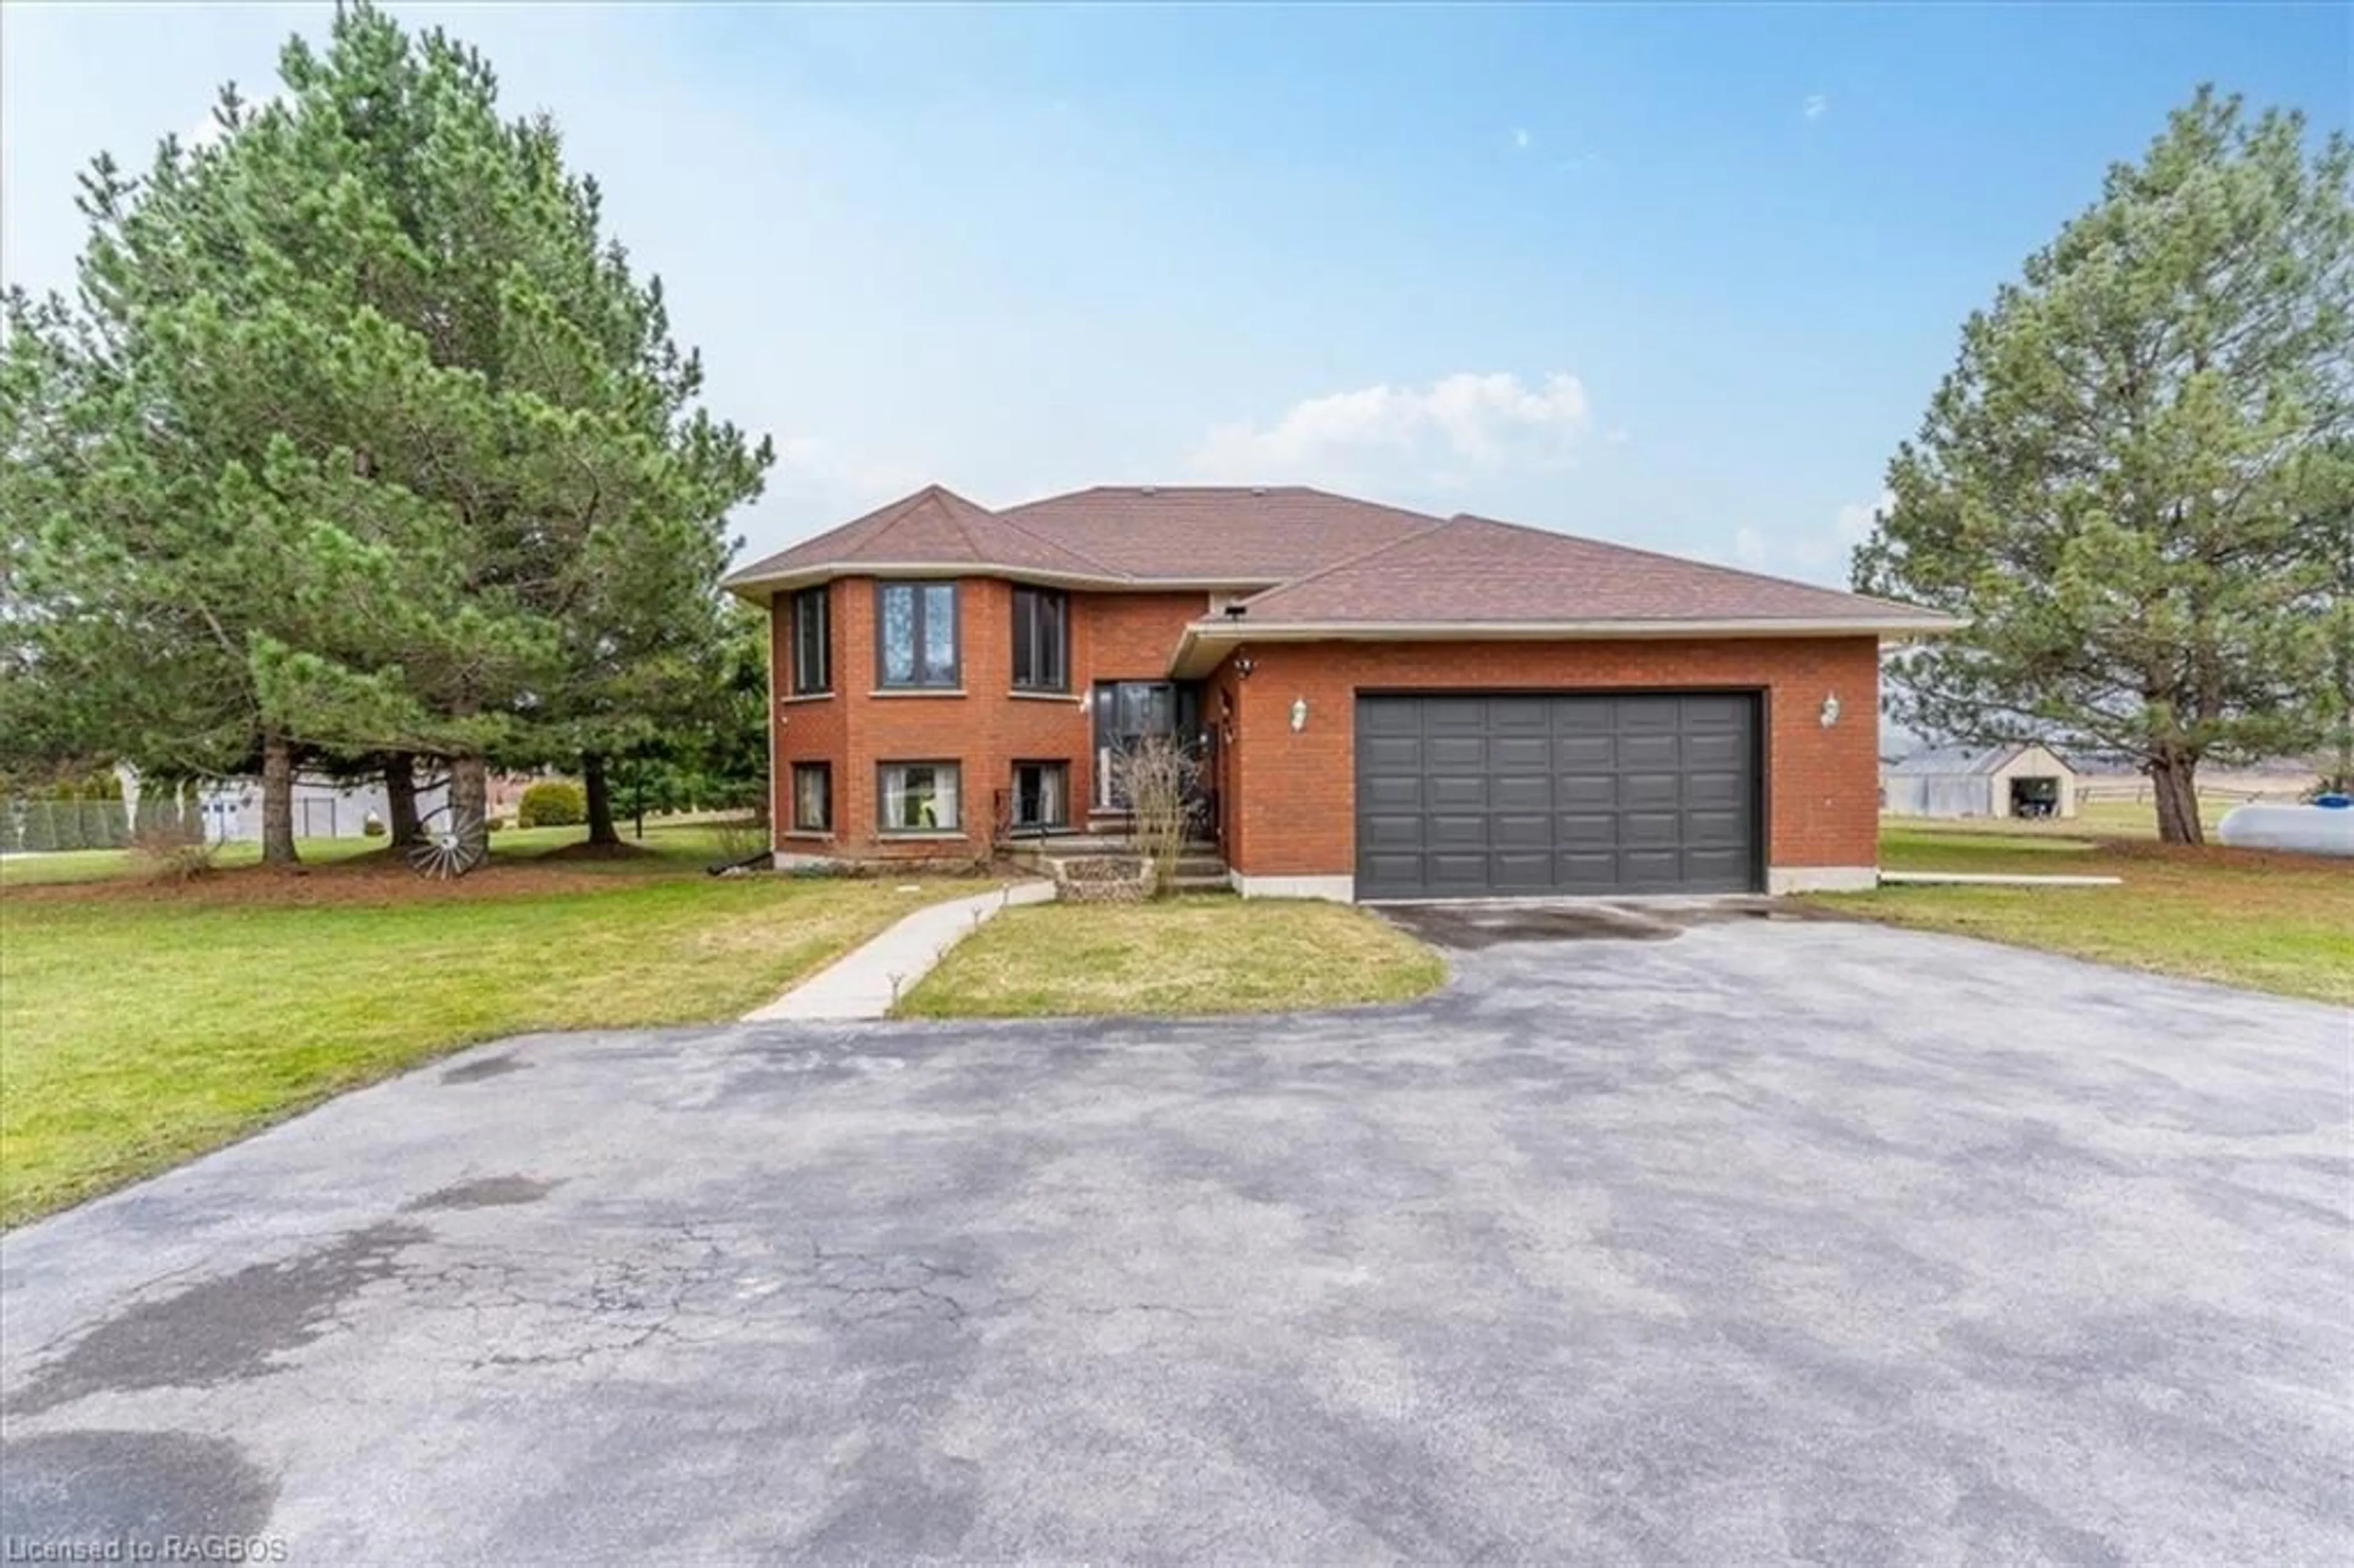 Home with brick exterior material for 363618 Lindenwood Rd, Kemble Ontario N0H 1S0